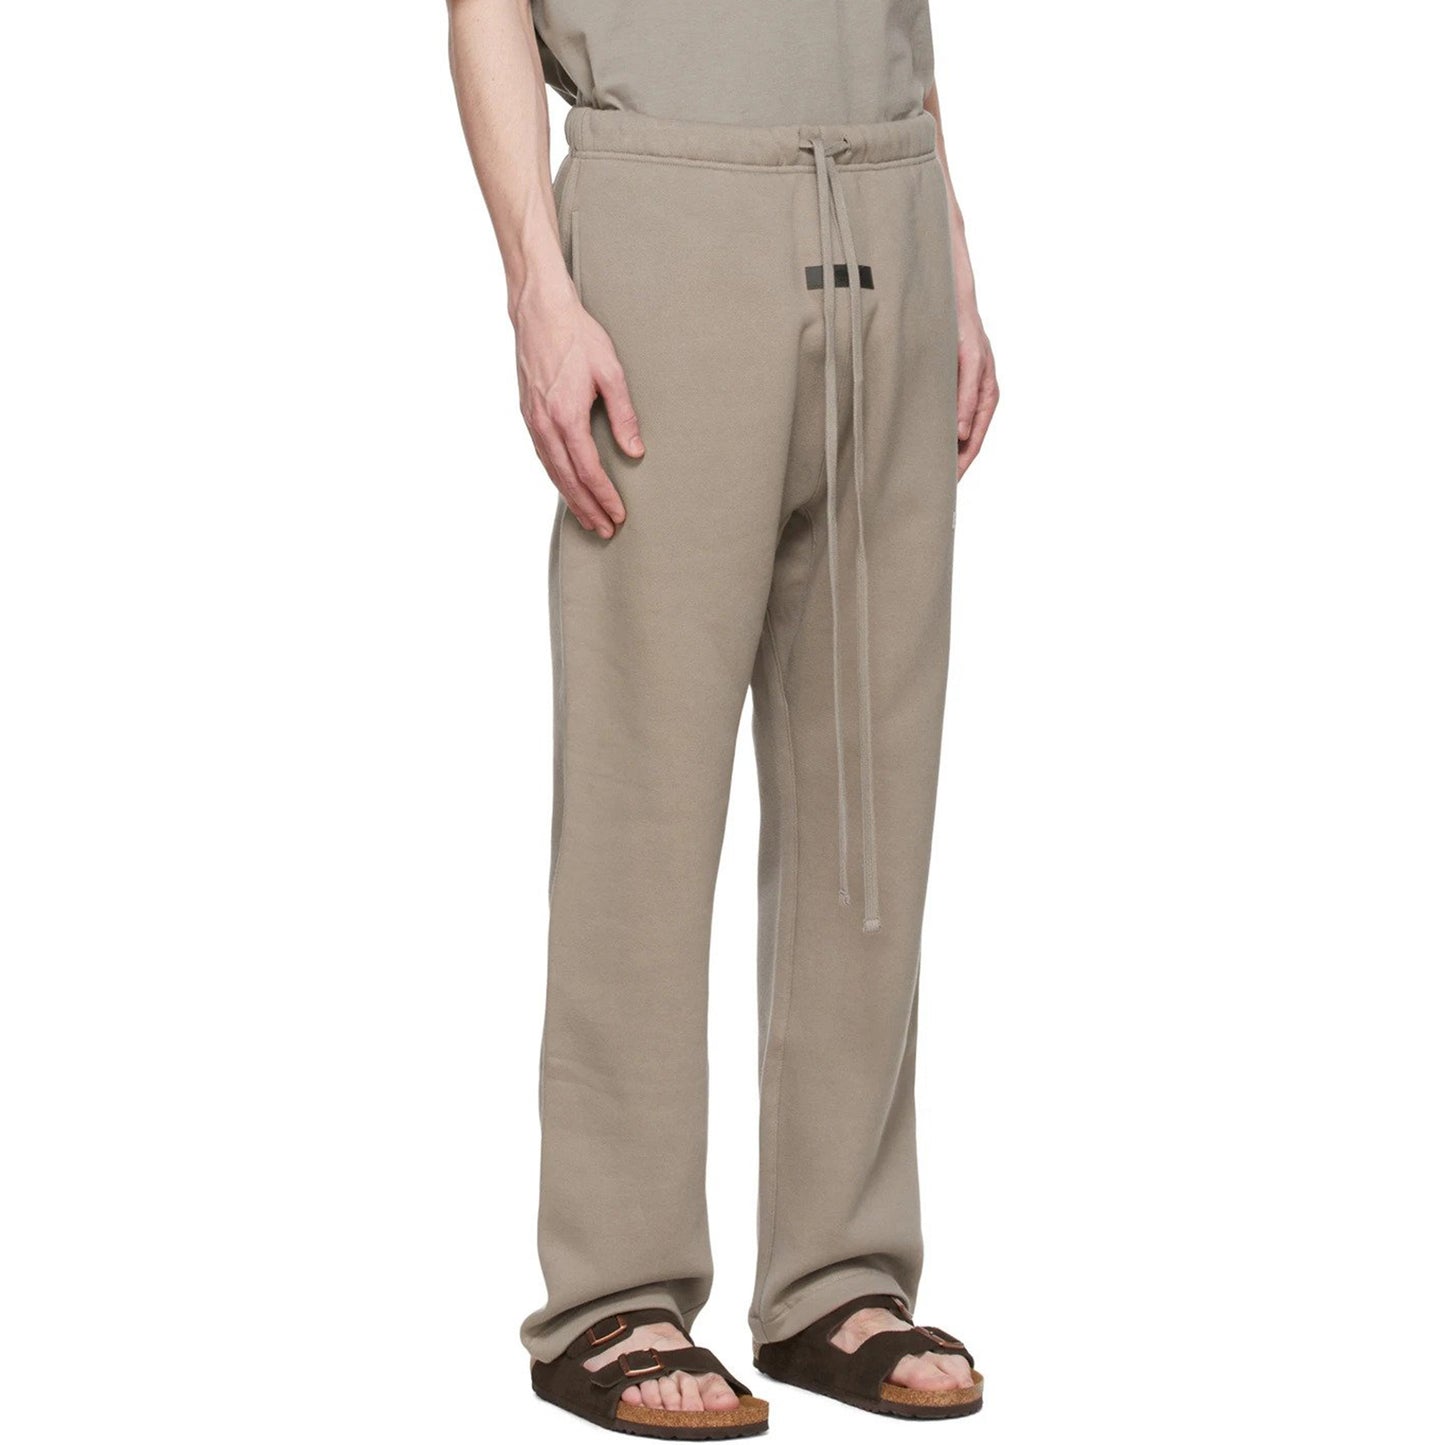 ESSENTIALS taupe cotton lounge pants